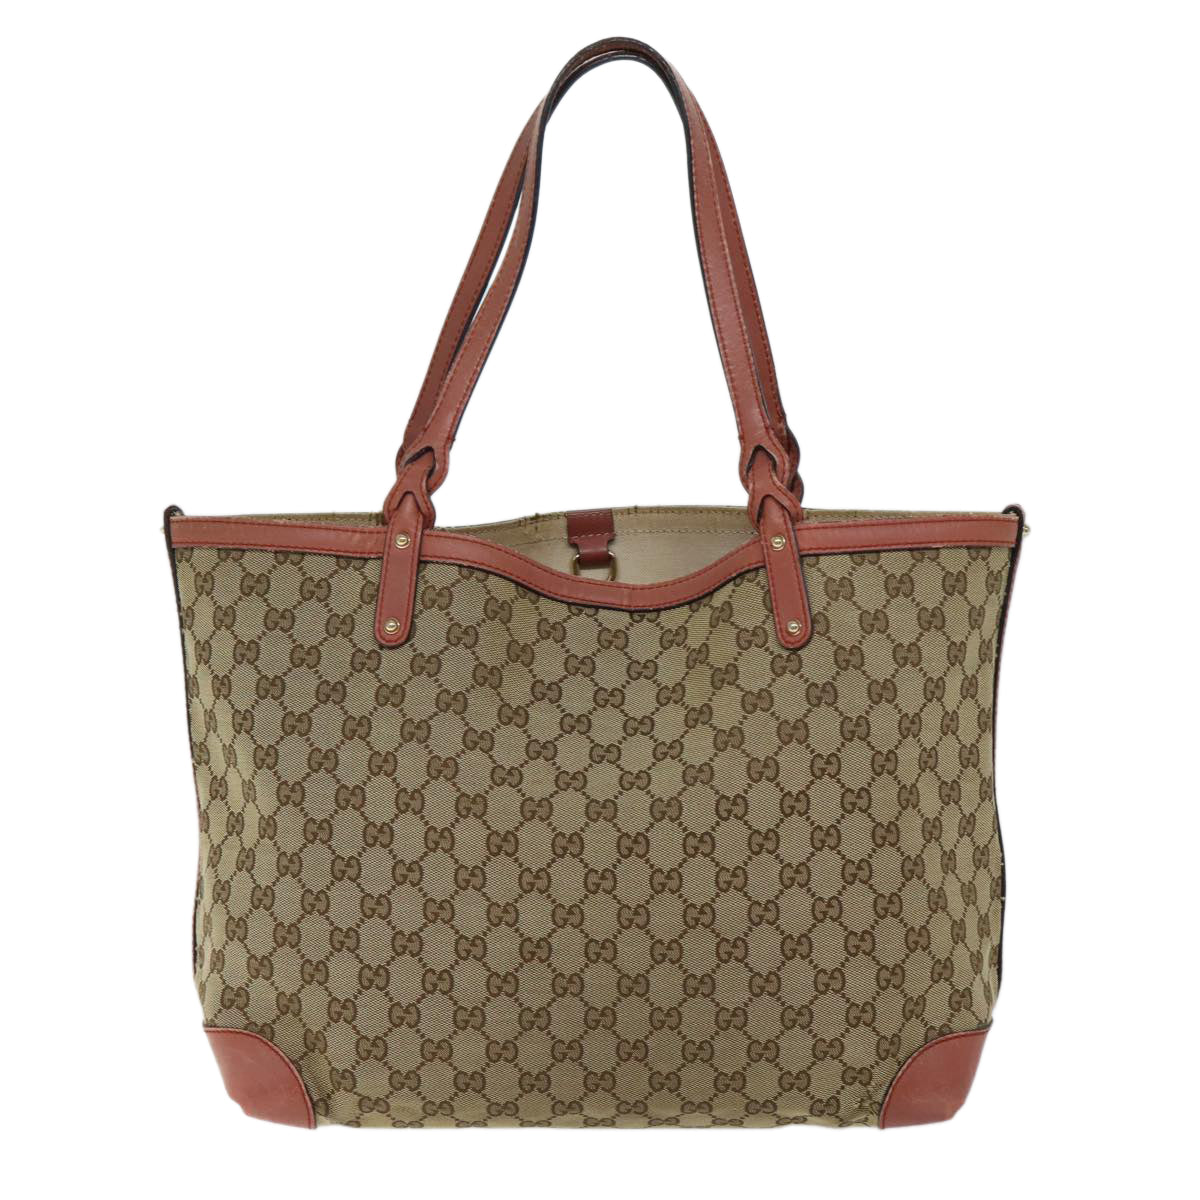 GUCCI GG Canvas Tote Bag Beige 247209 Auth bs13573 - 0